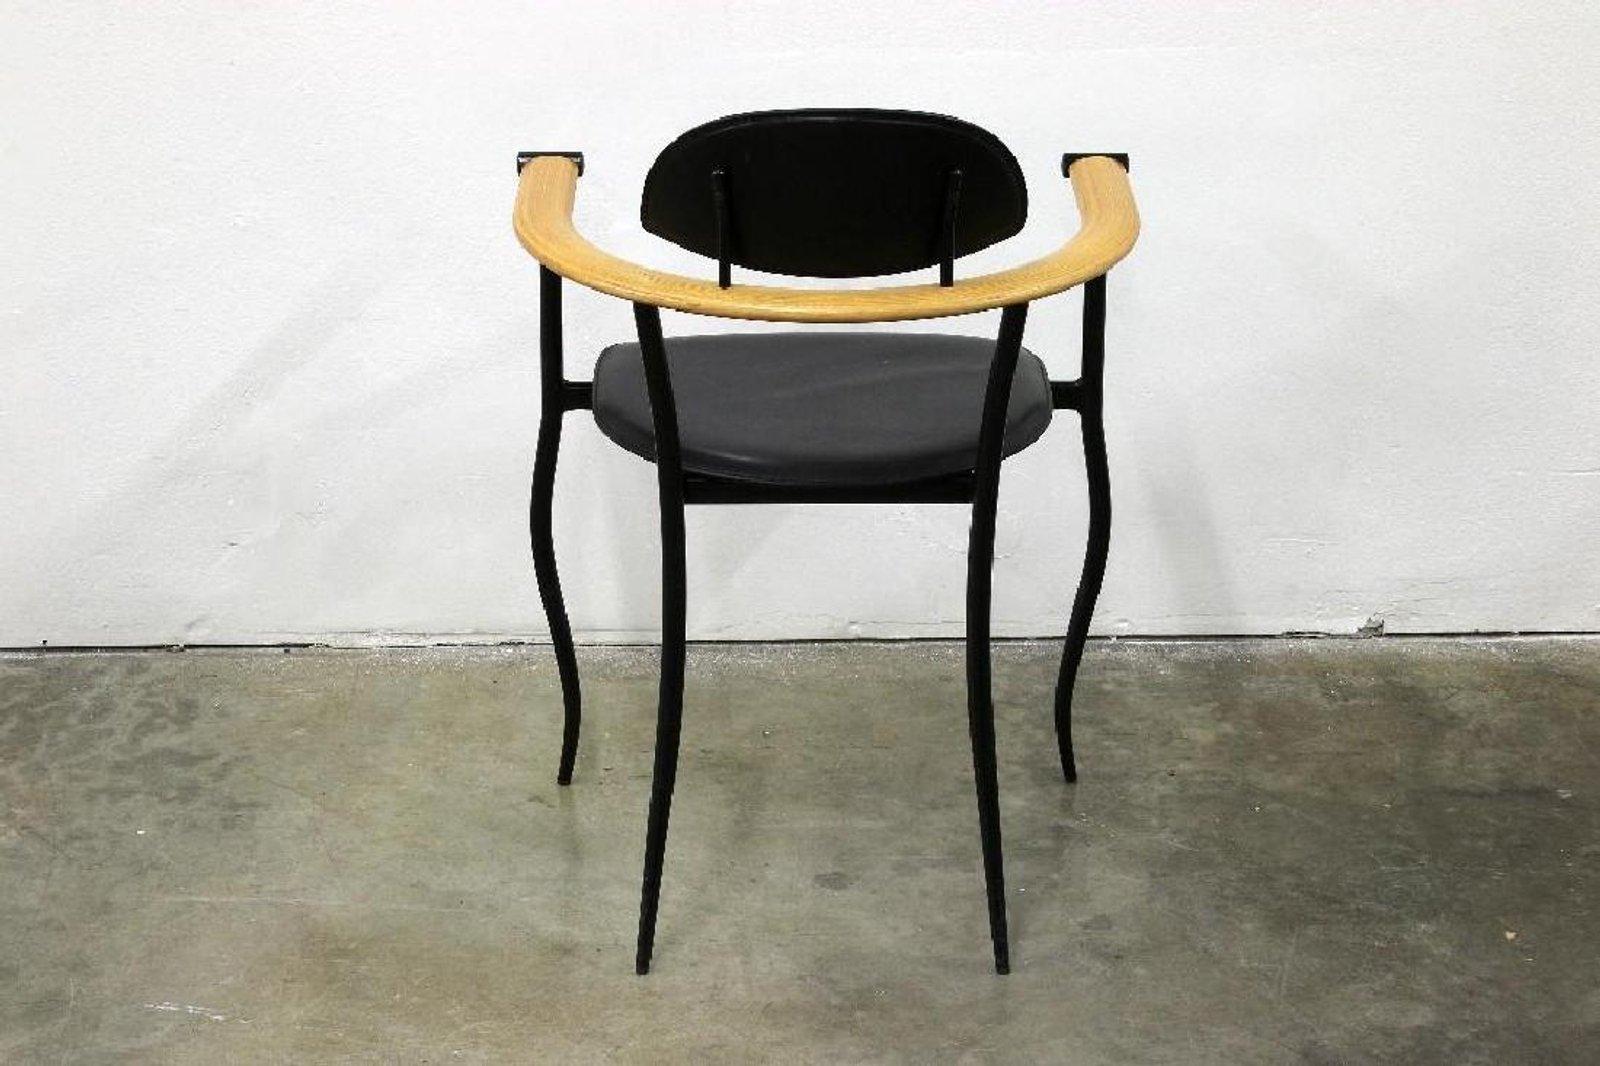 Curvaceous custom 'stilletto' chairs by Arrben with squiggly ebonized steel frames, stitched leather black and saddle upholstery.  Sleek, Italian, Post-Modern and in good vintage condition.  
